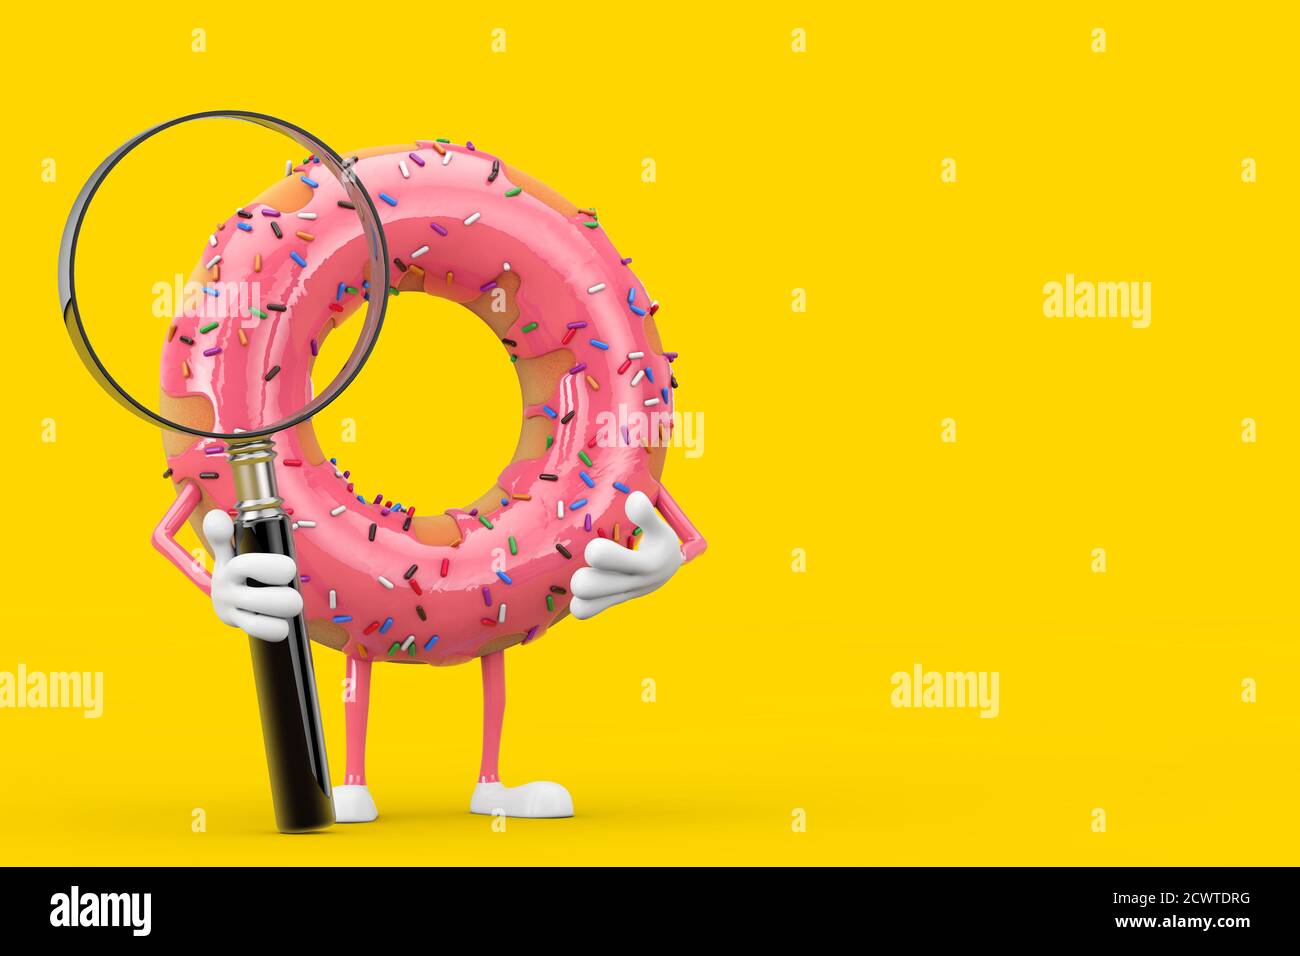 Big Strawberry Pink Glazed Donut Character Mascot with Magnifying Glass on a yellow background. 3d Rendering Stock Photo